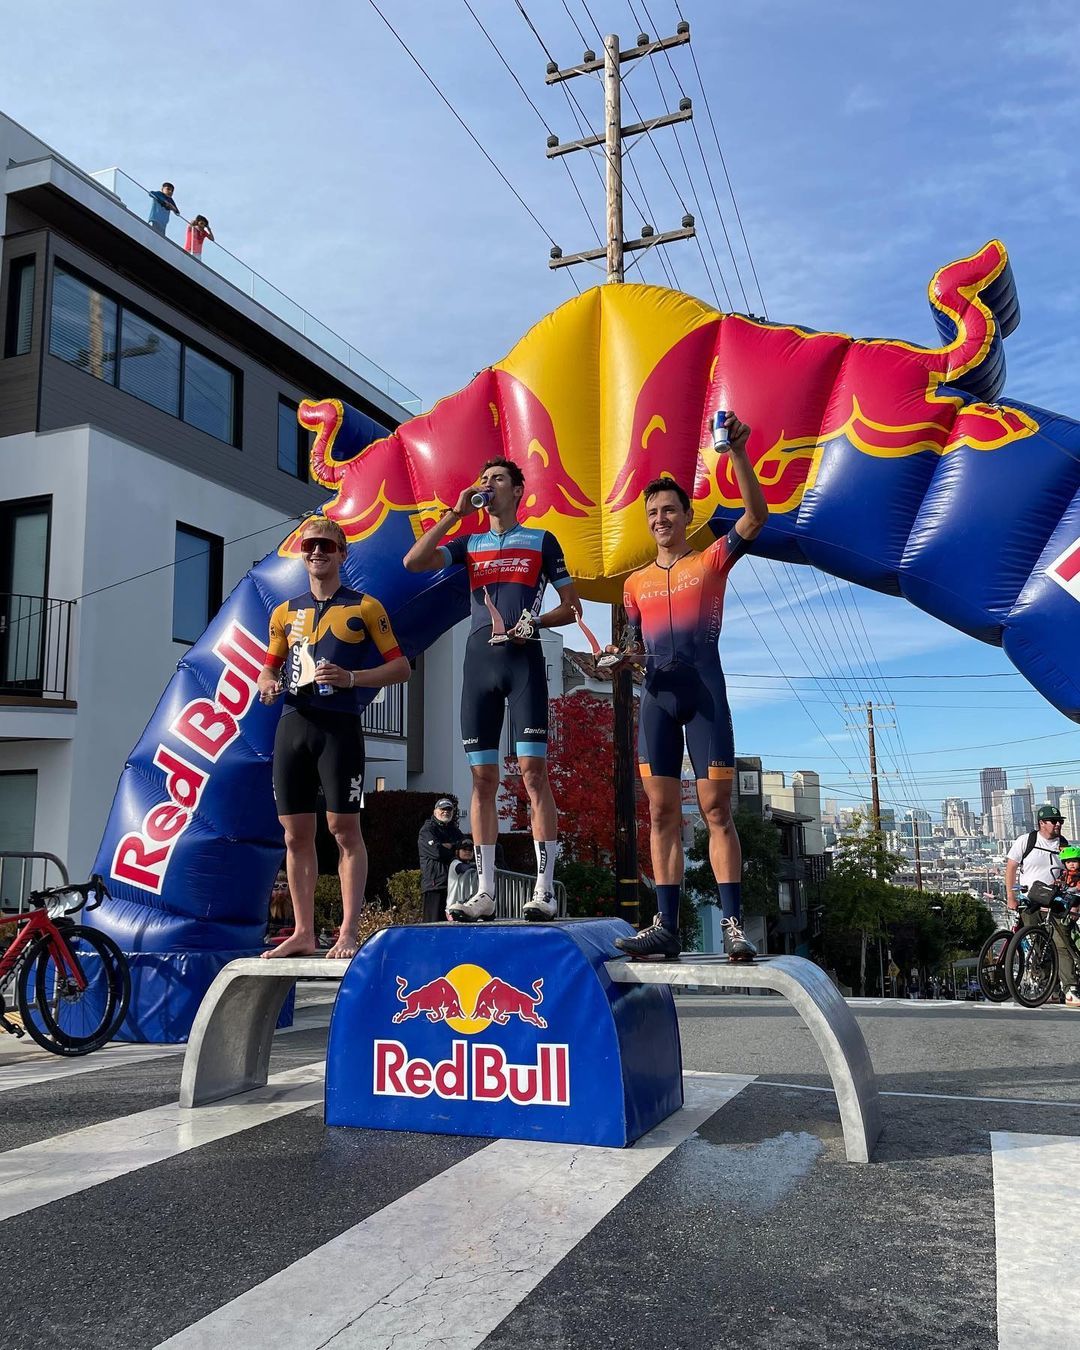 Congrats @harryelworthy on taking 🥈at the @redbull Bay Climb! A super strong follow up to your title defense!  Is it the off-season now?? 

Let’s go DVC!

@obbi.cc @sfitalianathleticclub @equatorcoffees @achieveptc @untappedmaple @tripsforkidsmarin  @worldbicyclerelief @marinservicecourse @osmonutrition @jkbrkb #themenkegeoup #onewealthadvisors